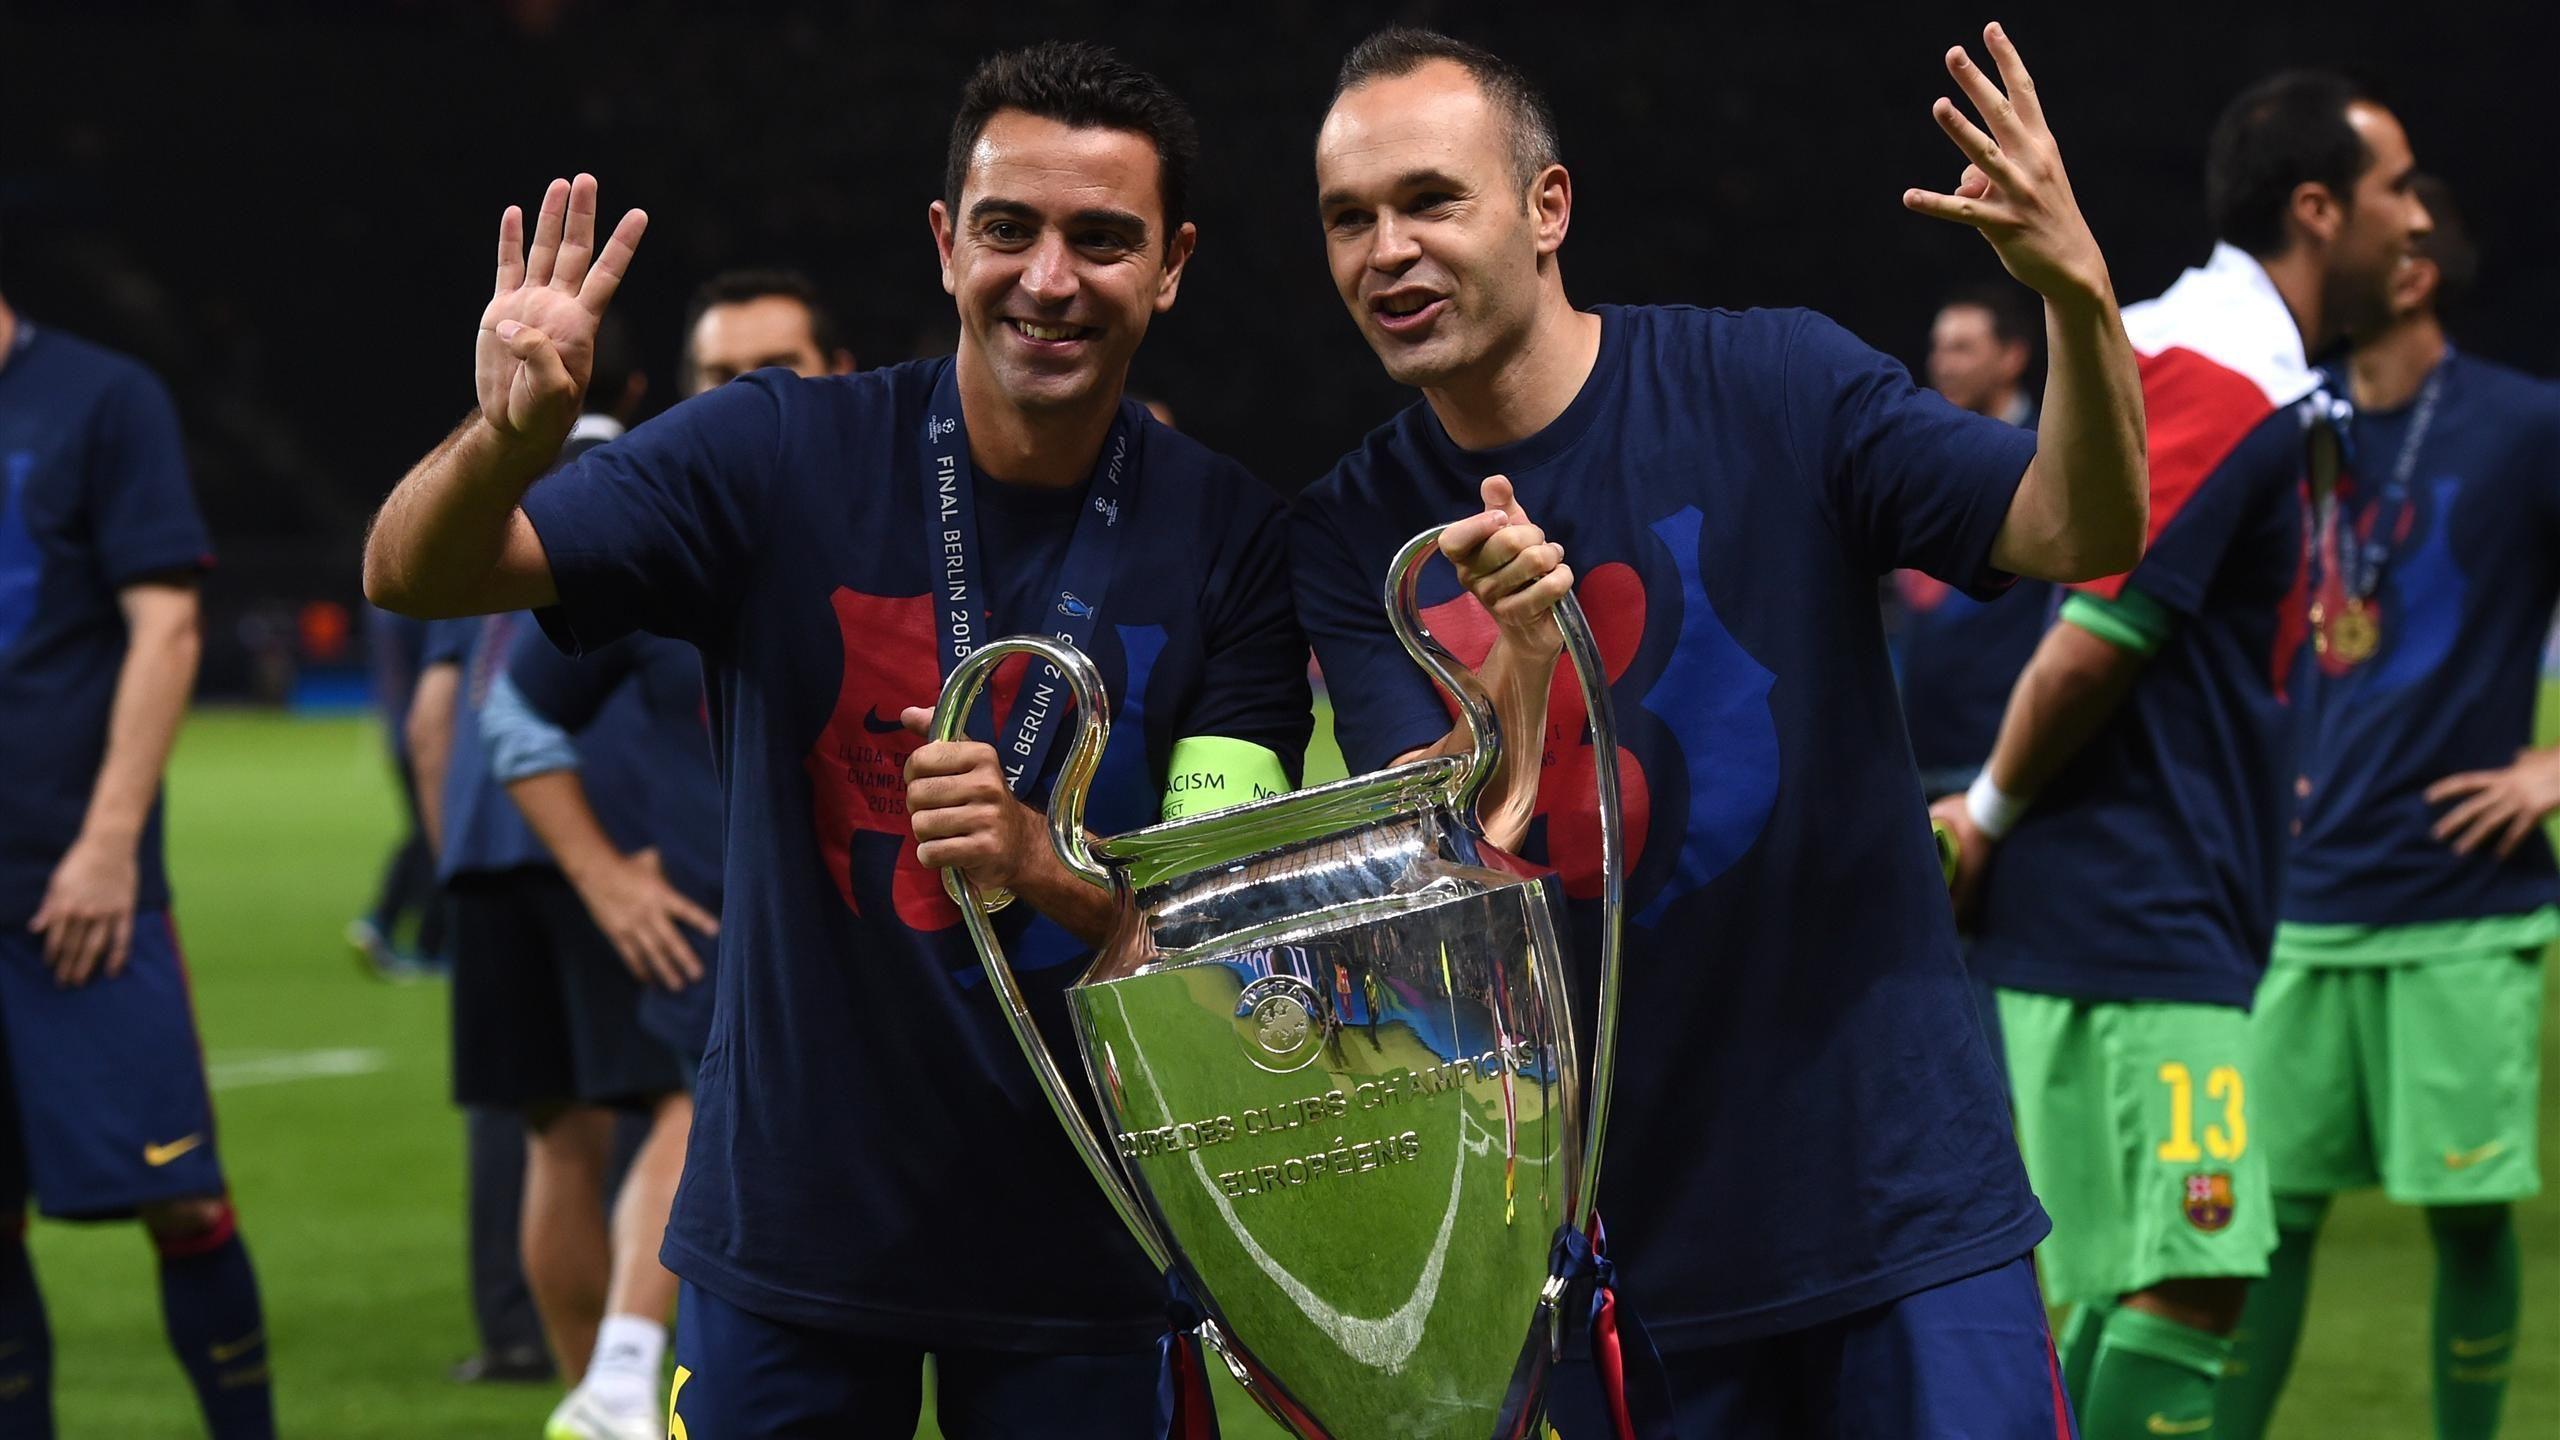 Xavi and Iniesta: The days of artistic commands